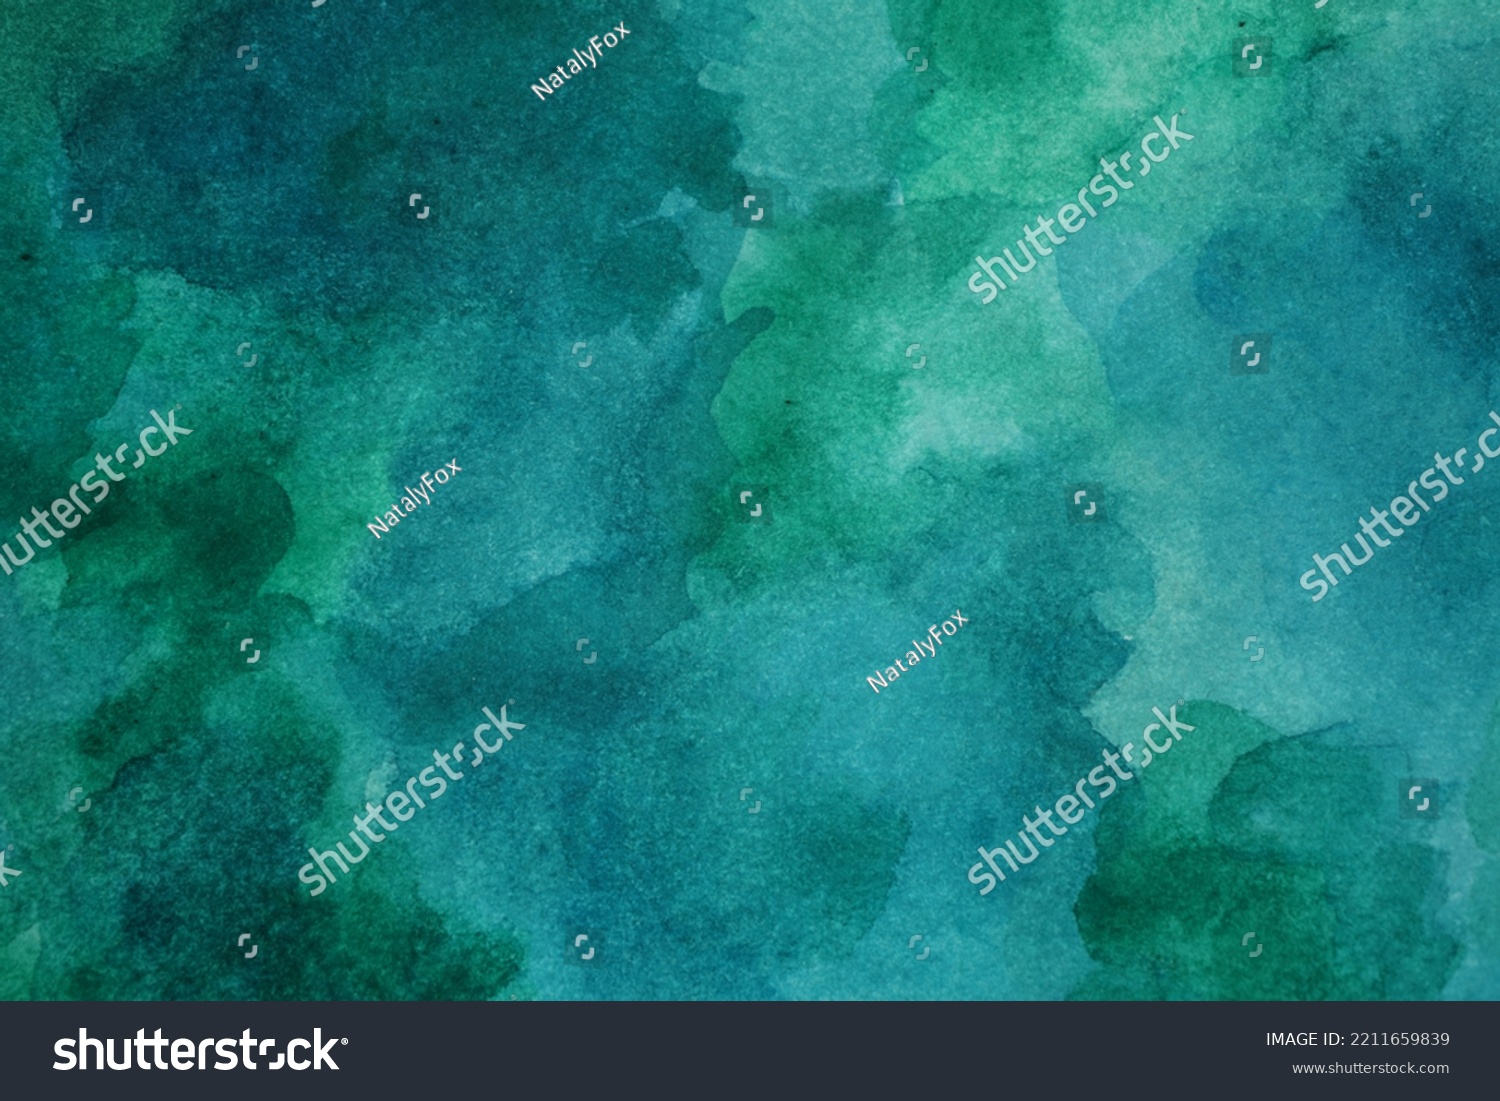  Blue green abstract watercolor. Art background for design. Daub, spot, stain.                               #2211659839